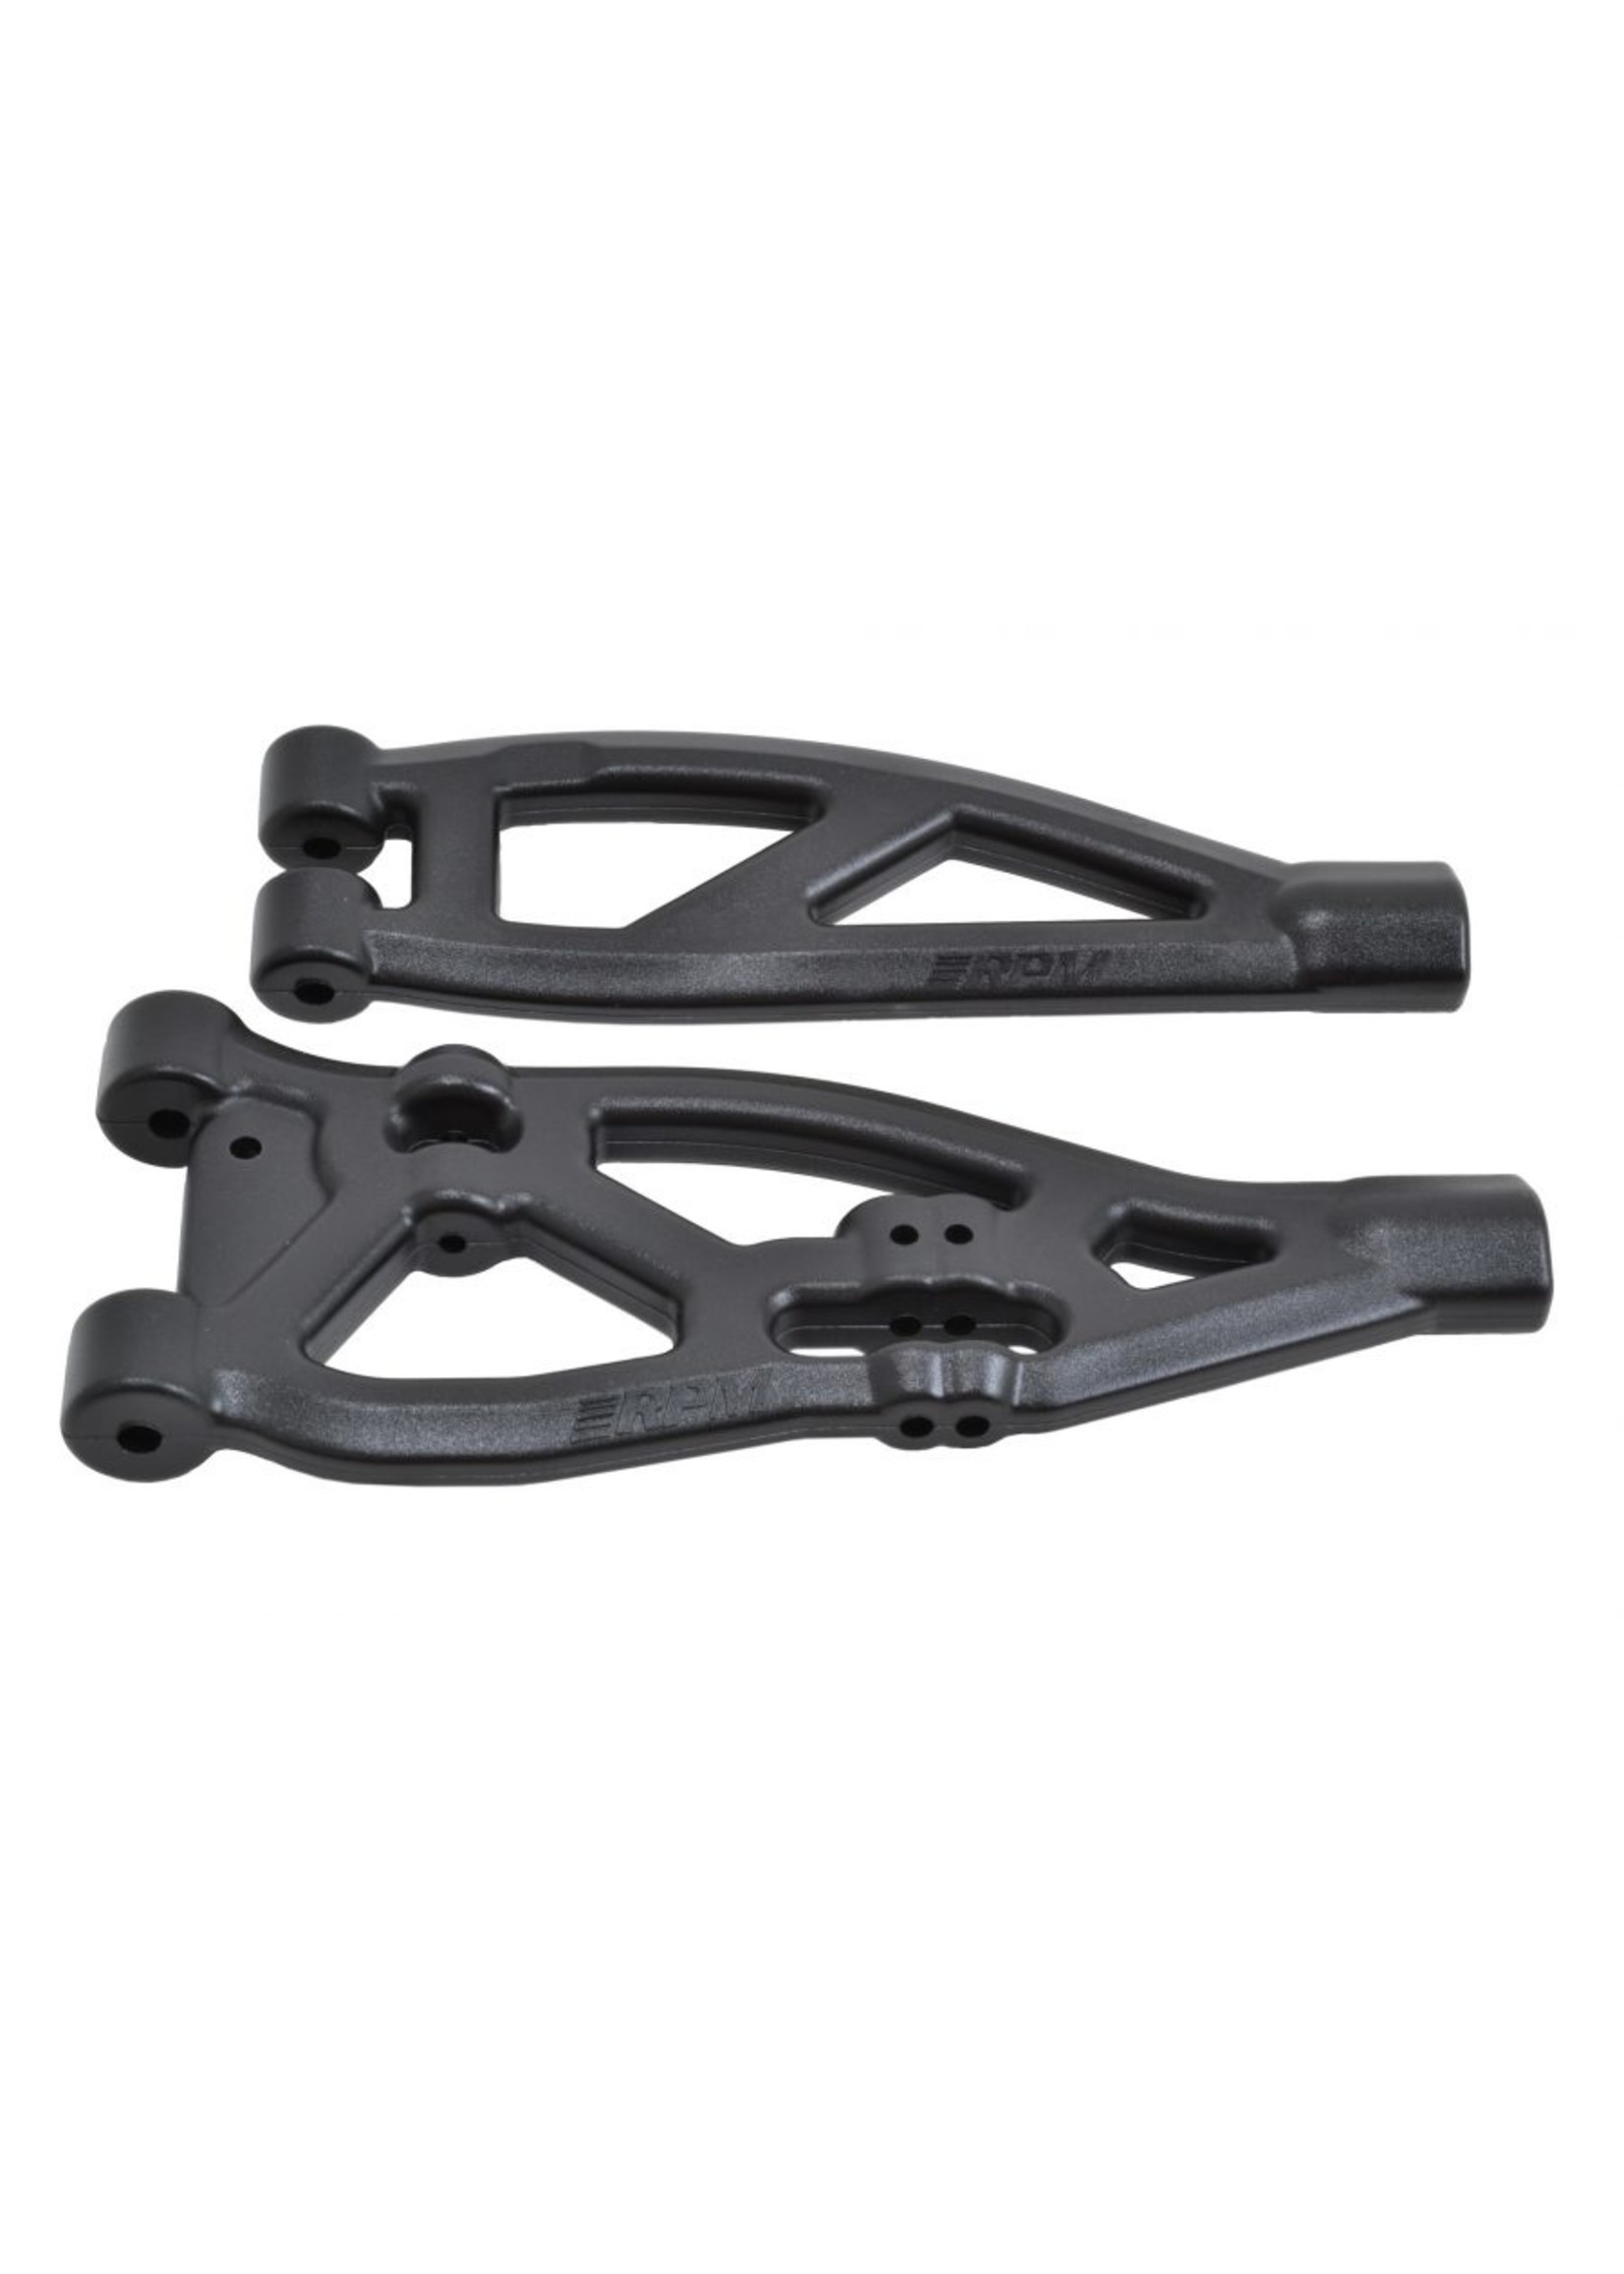 RPM 81482 - Front Upper/Lower A-arms for 6S versions of ARRMA Kraton, Talion & Outcast - Black